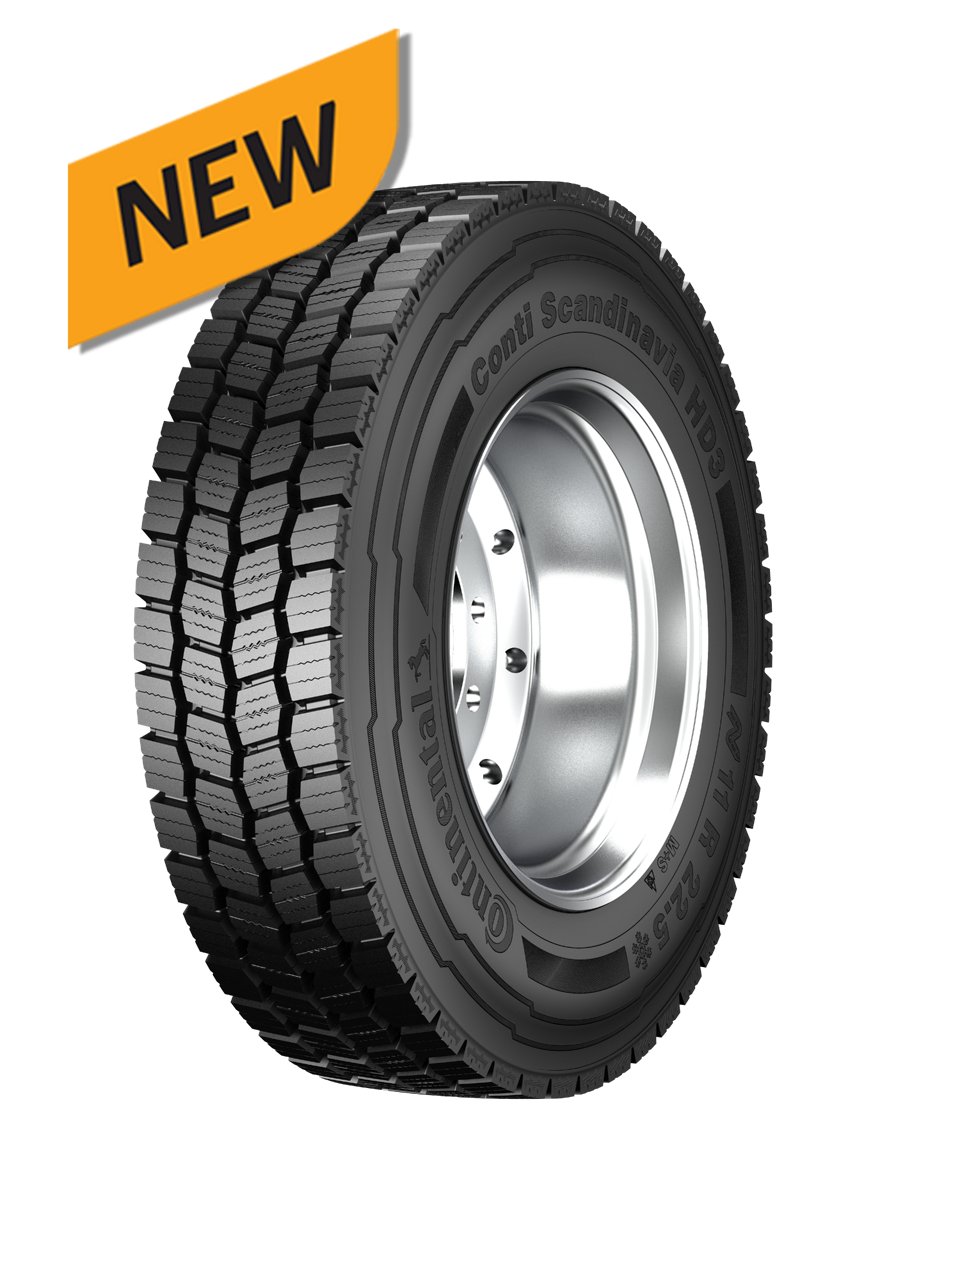 The new Conti Scandinavia HD3 tire is 3PMSF Certified and performs well in snow + mud.